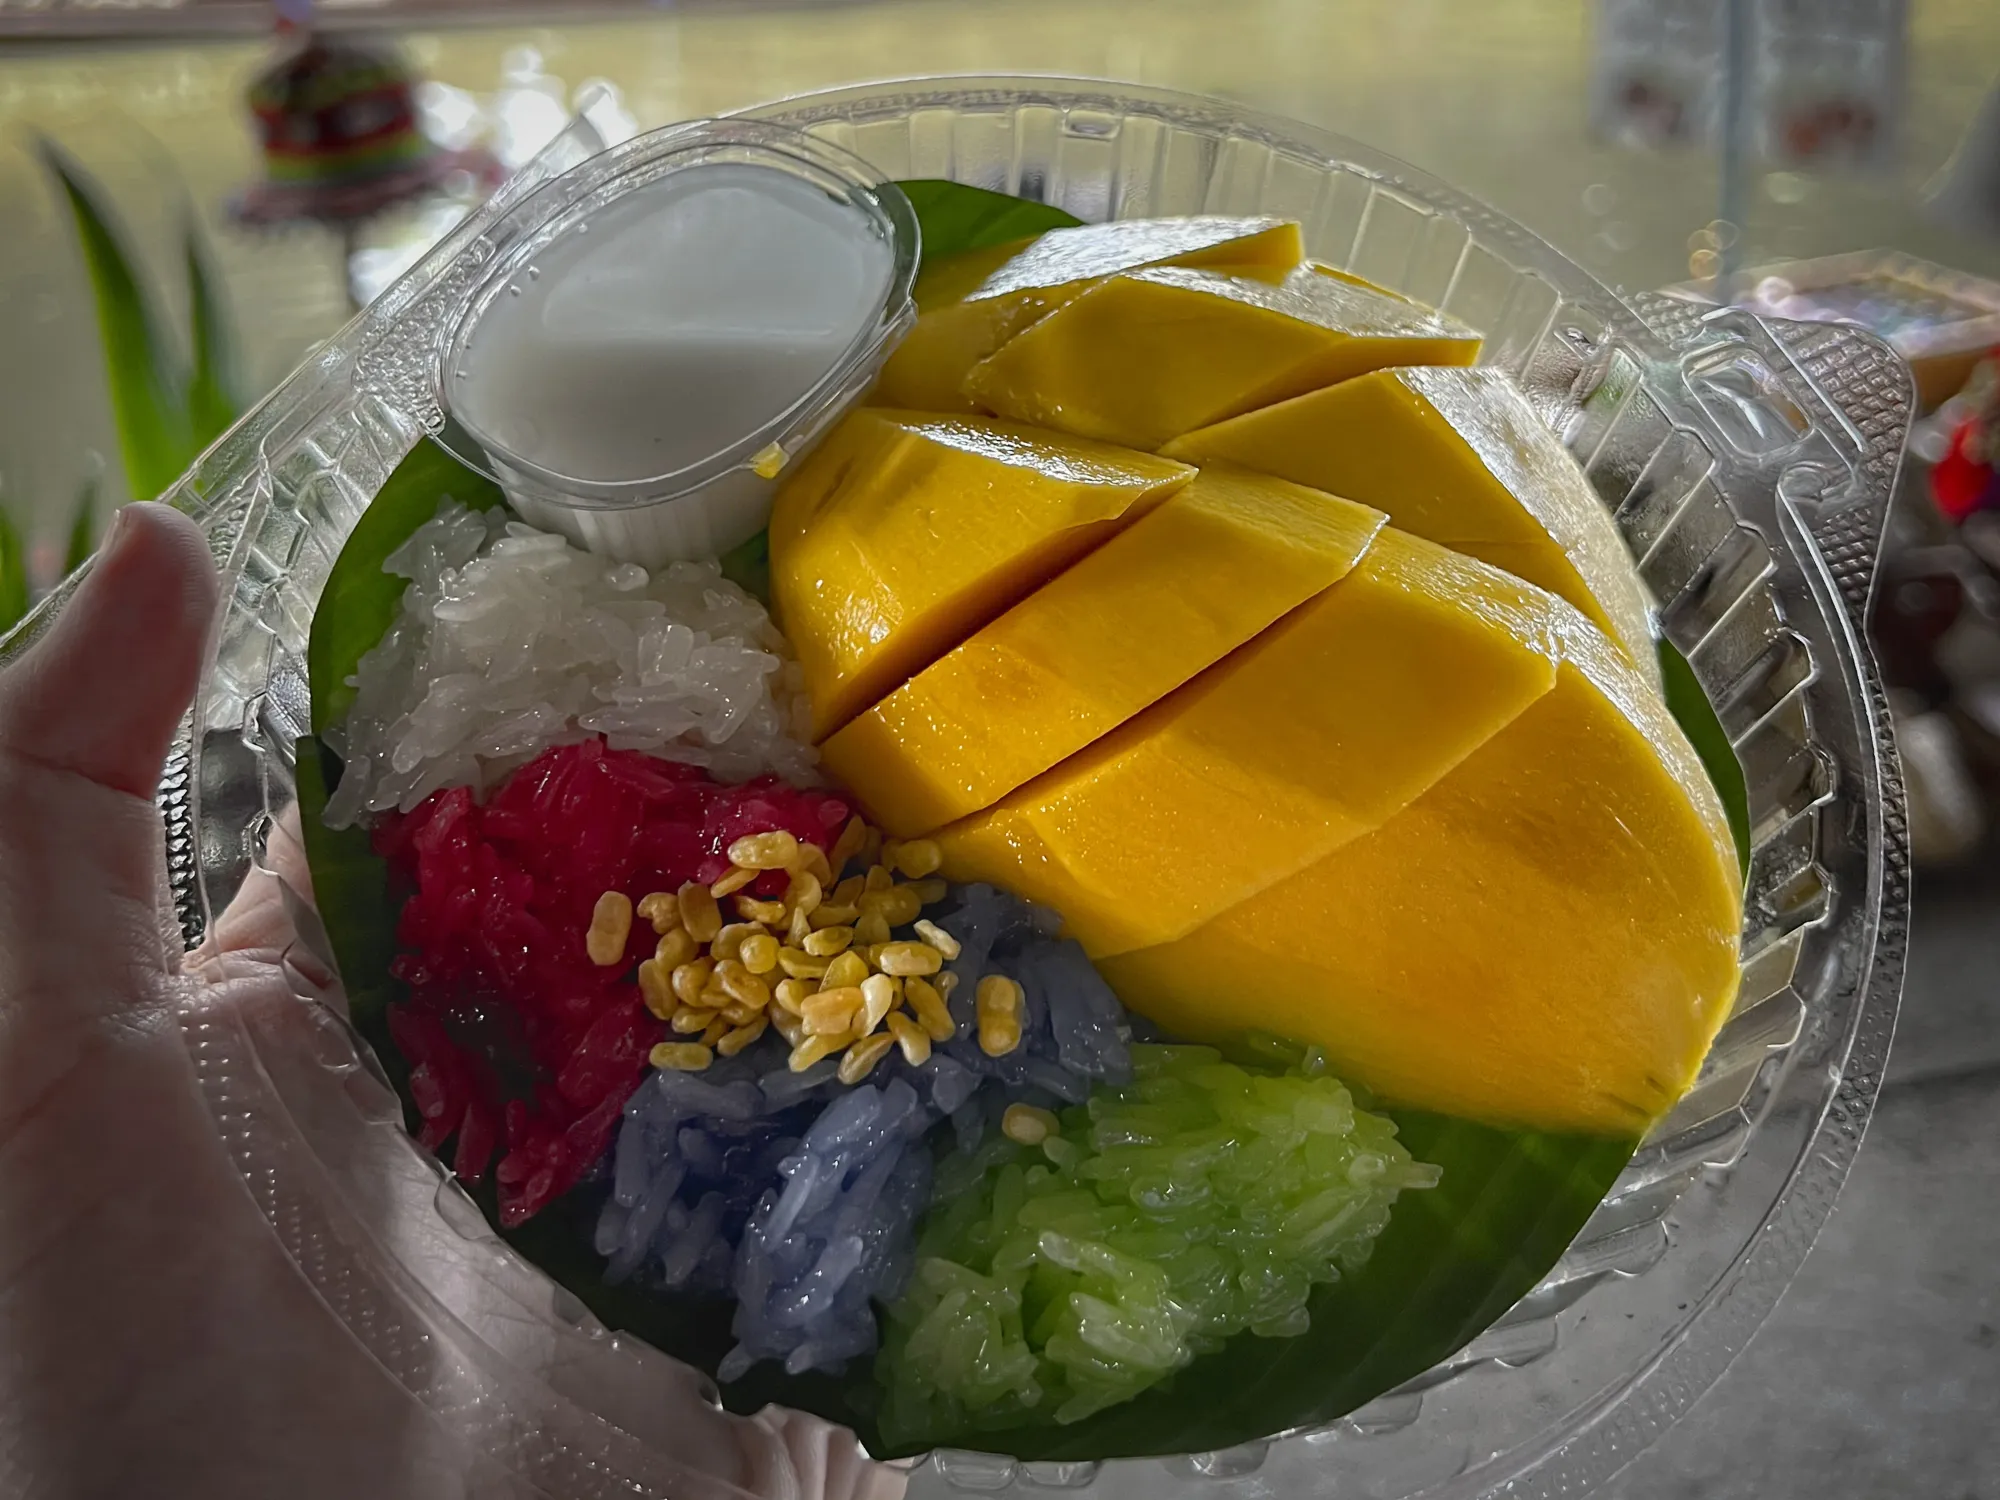 Mango sticky rice with colored sticky rice in a plastic container, floating markets in the background.